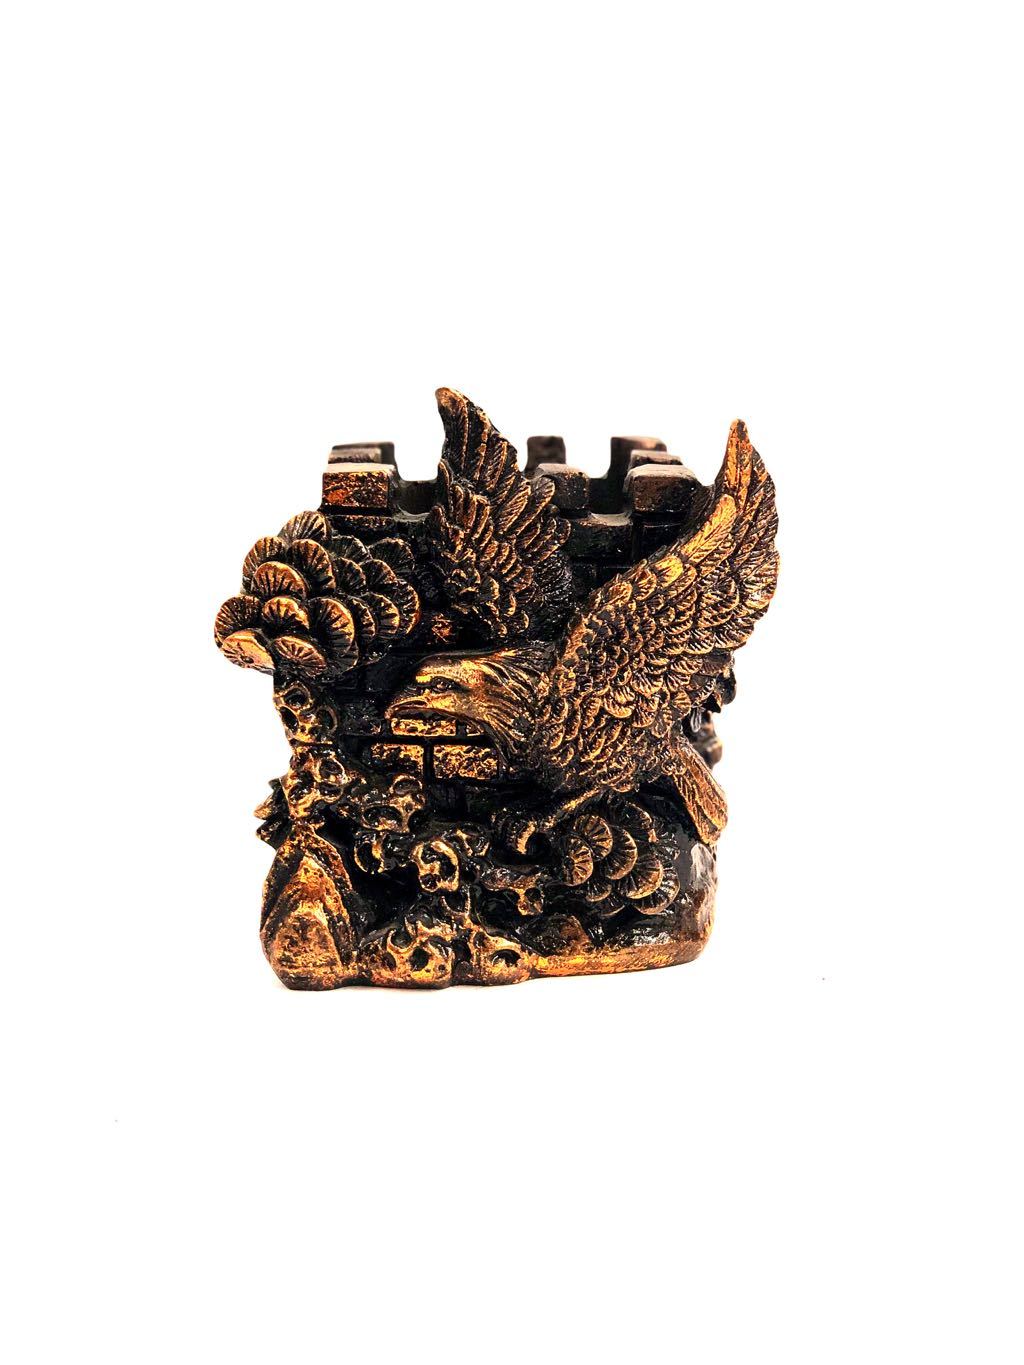 Eagle Style Resin Crafts Utility Pen Stand Excellent Quality By Tamrapatra